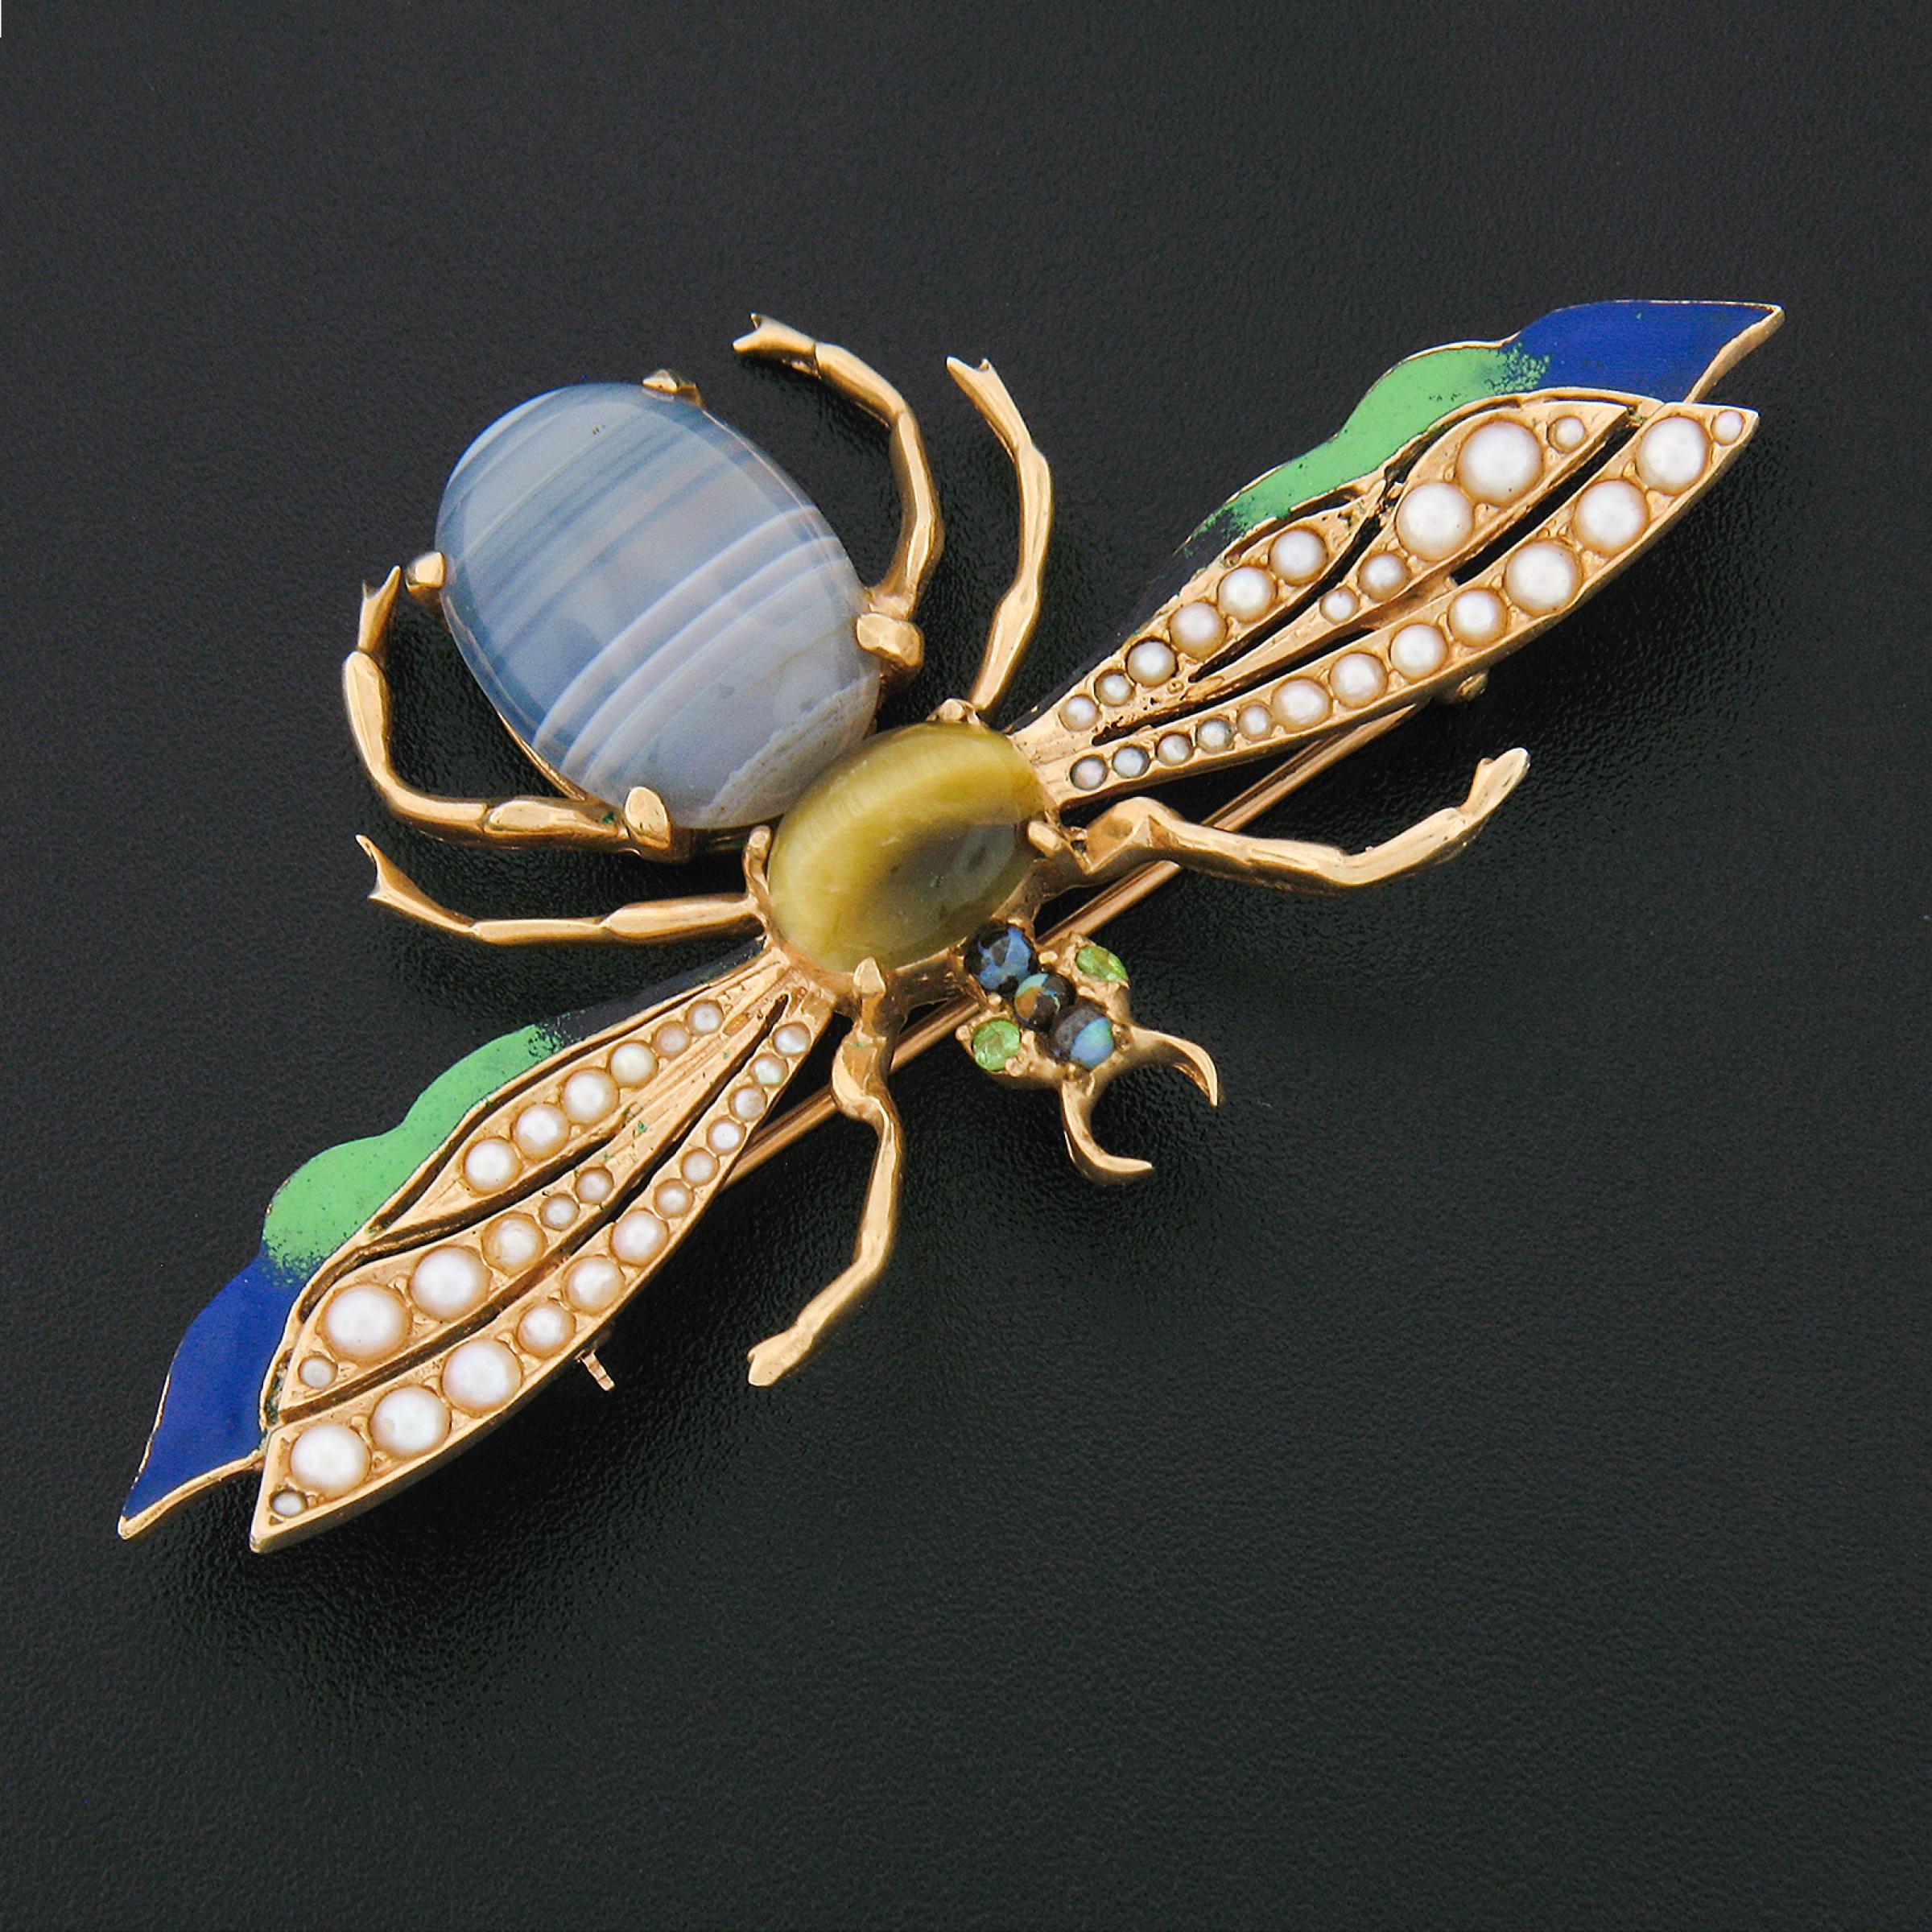 You are looking at a unique, very well-made, vintage brooch crafted in solid 14k yellow gold. The design features a large fly set with a genuine banded agate, and tigers eye at its body. The wings are adorned with lovely seed pearls and gorgeous